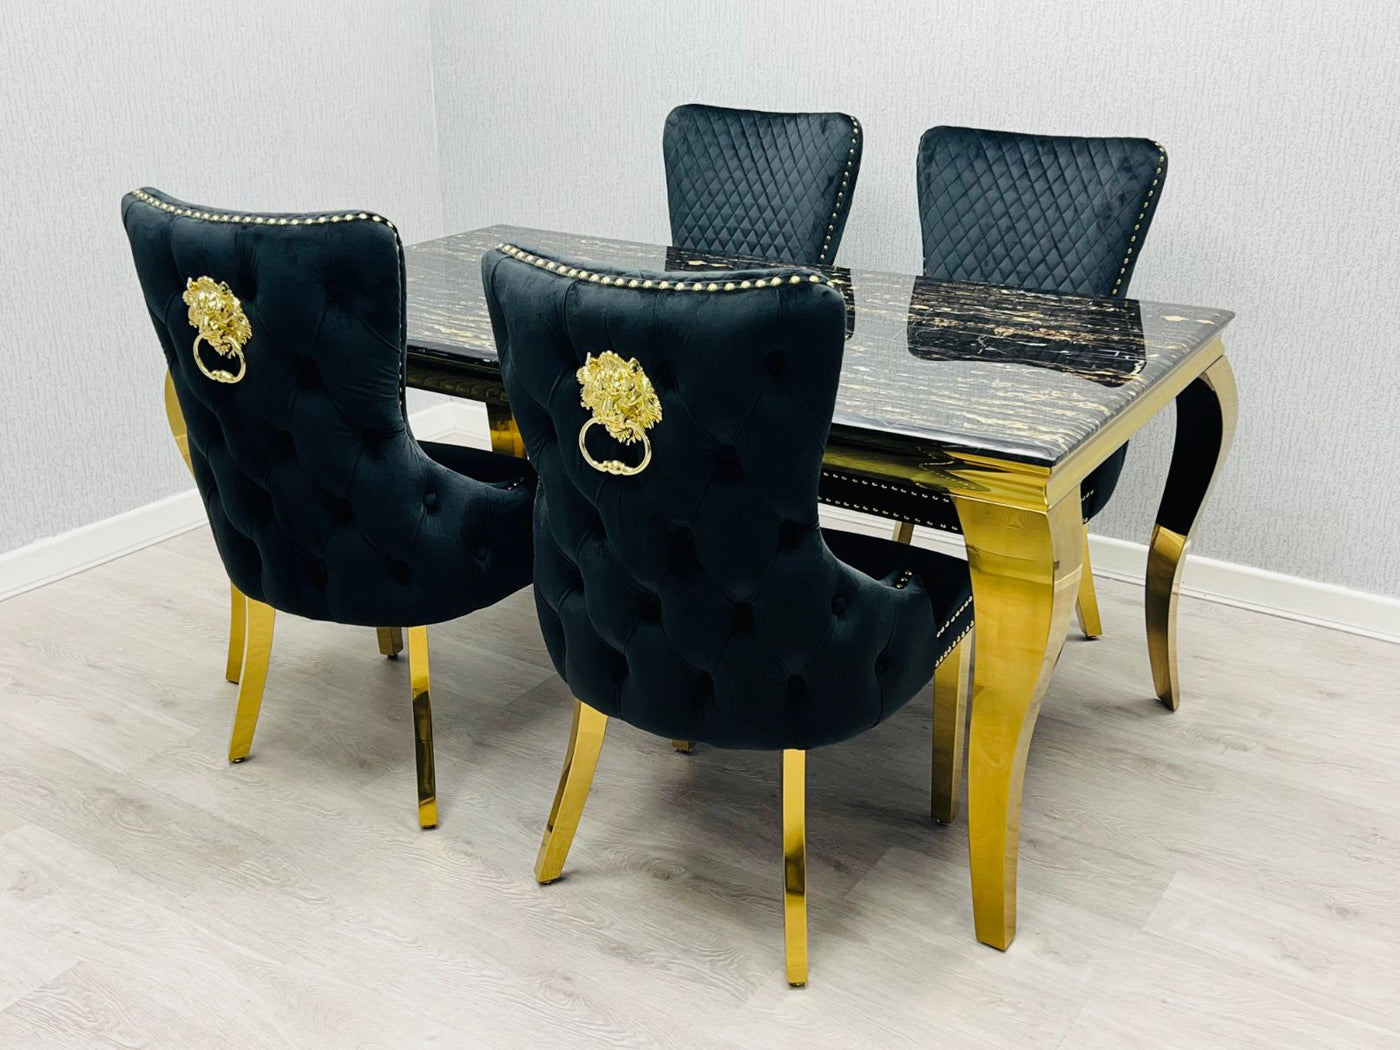 Louis Gold Black Marble Dining Table With Shimmer Black / Gold Lion Knocker Dining Chairs